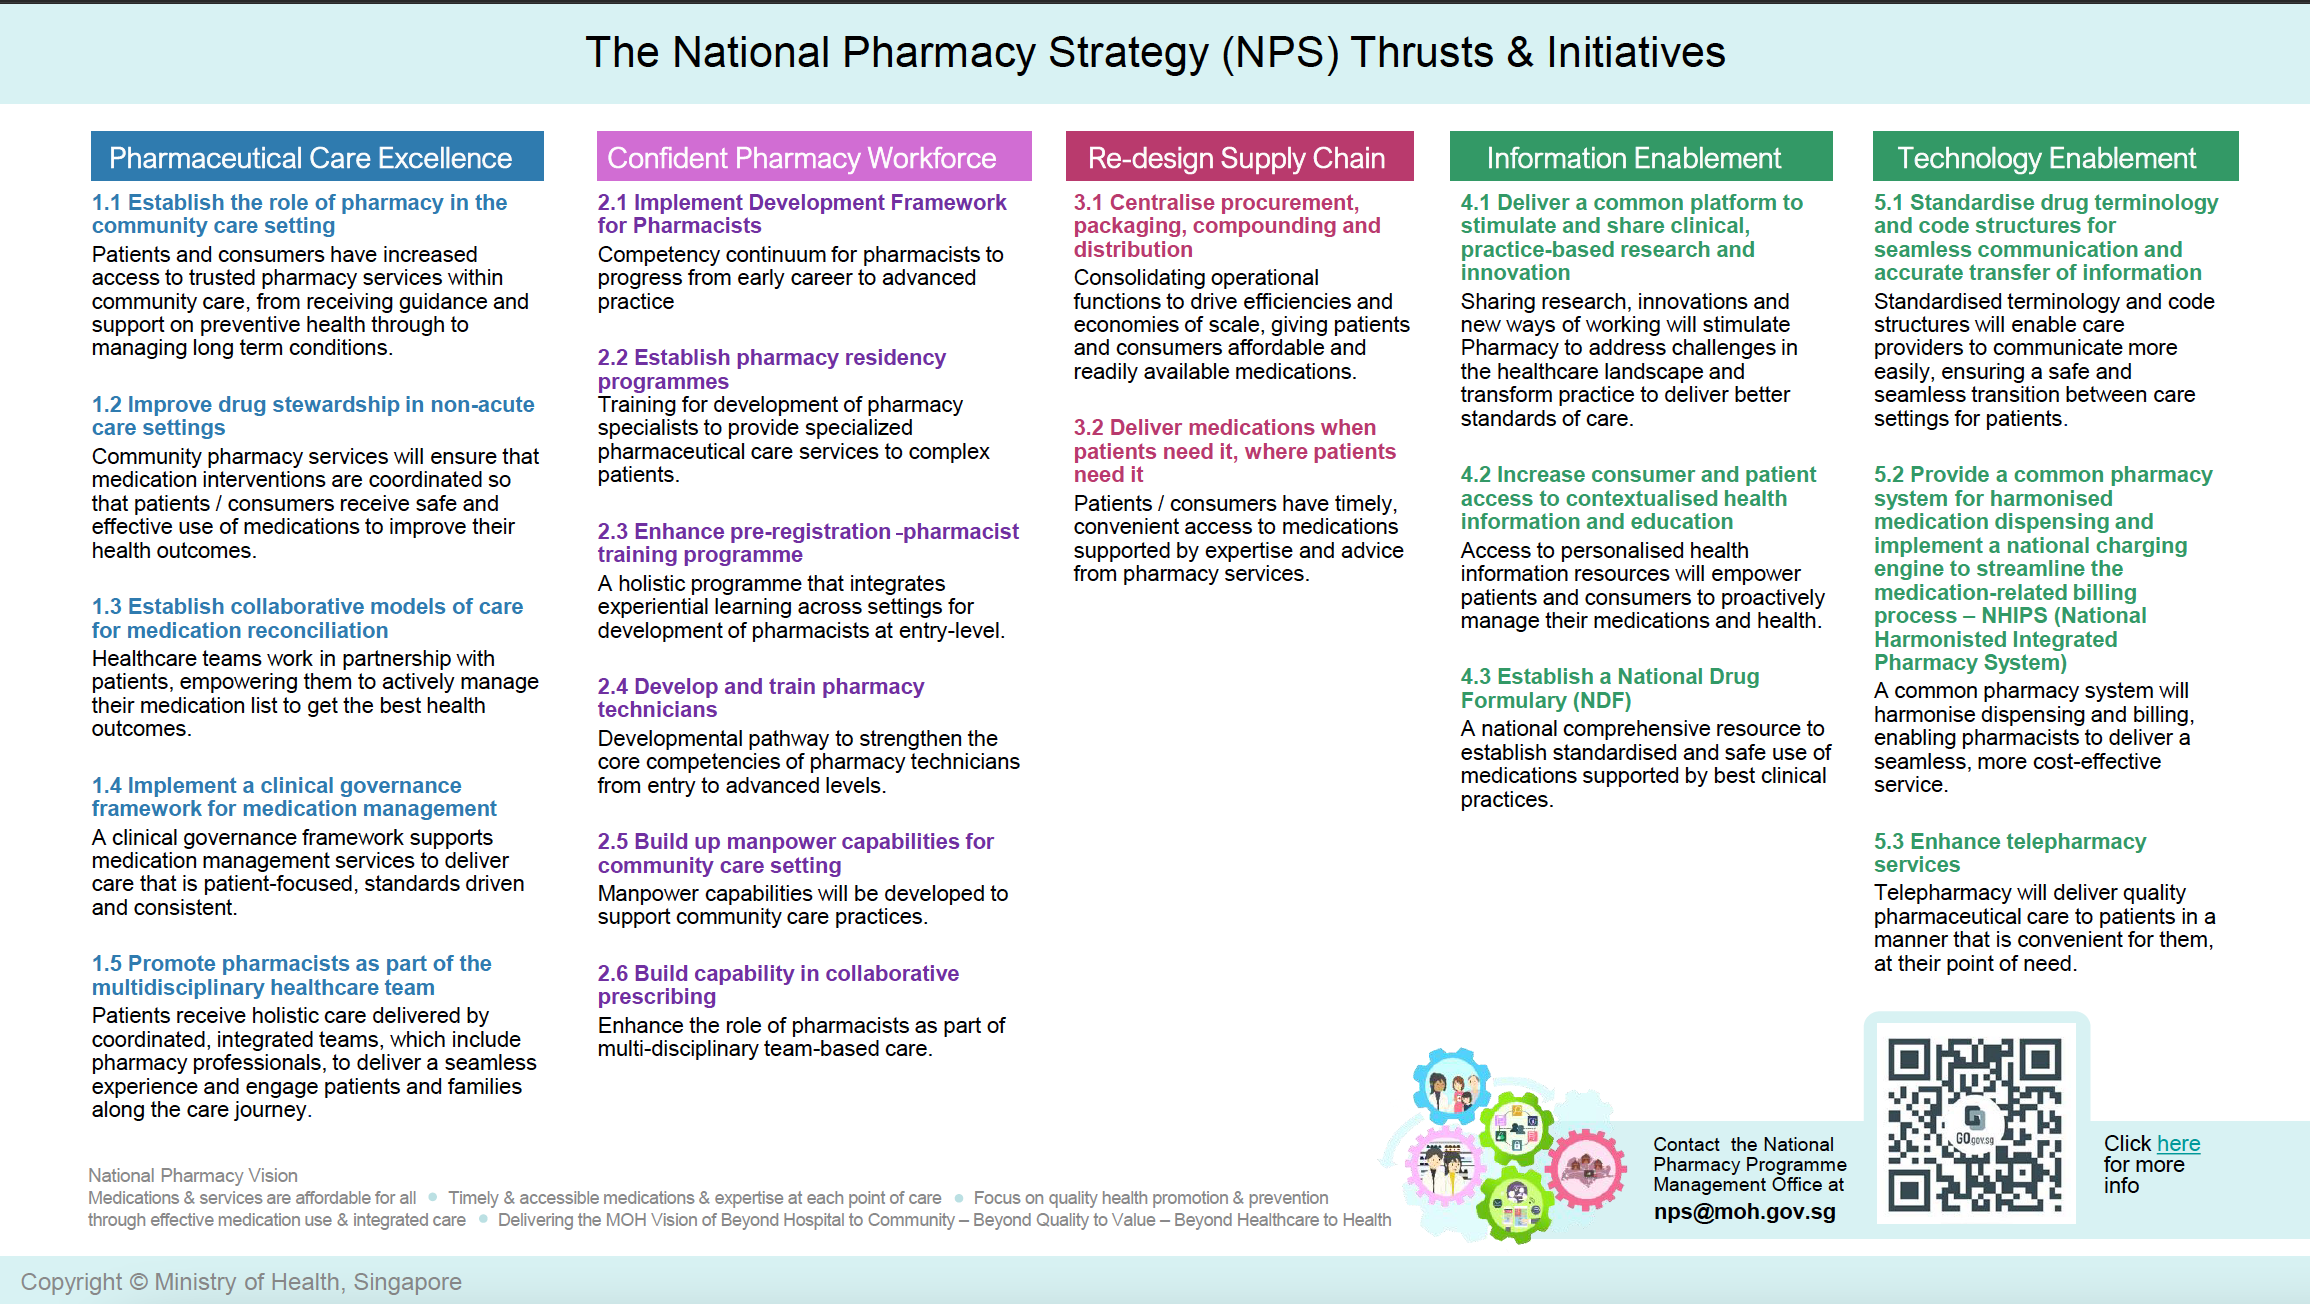 About National Pharmacy Strategy